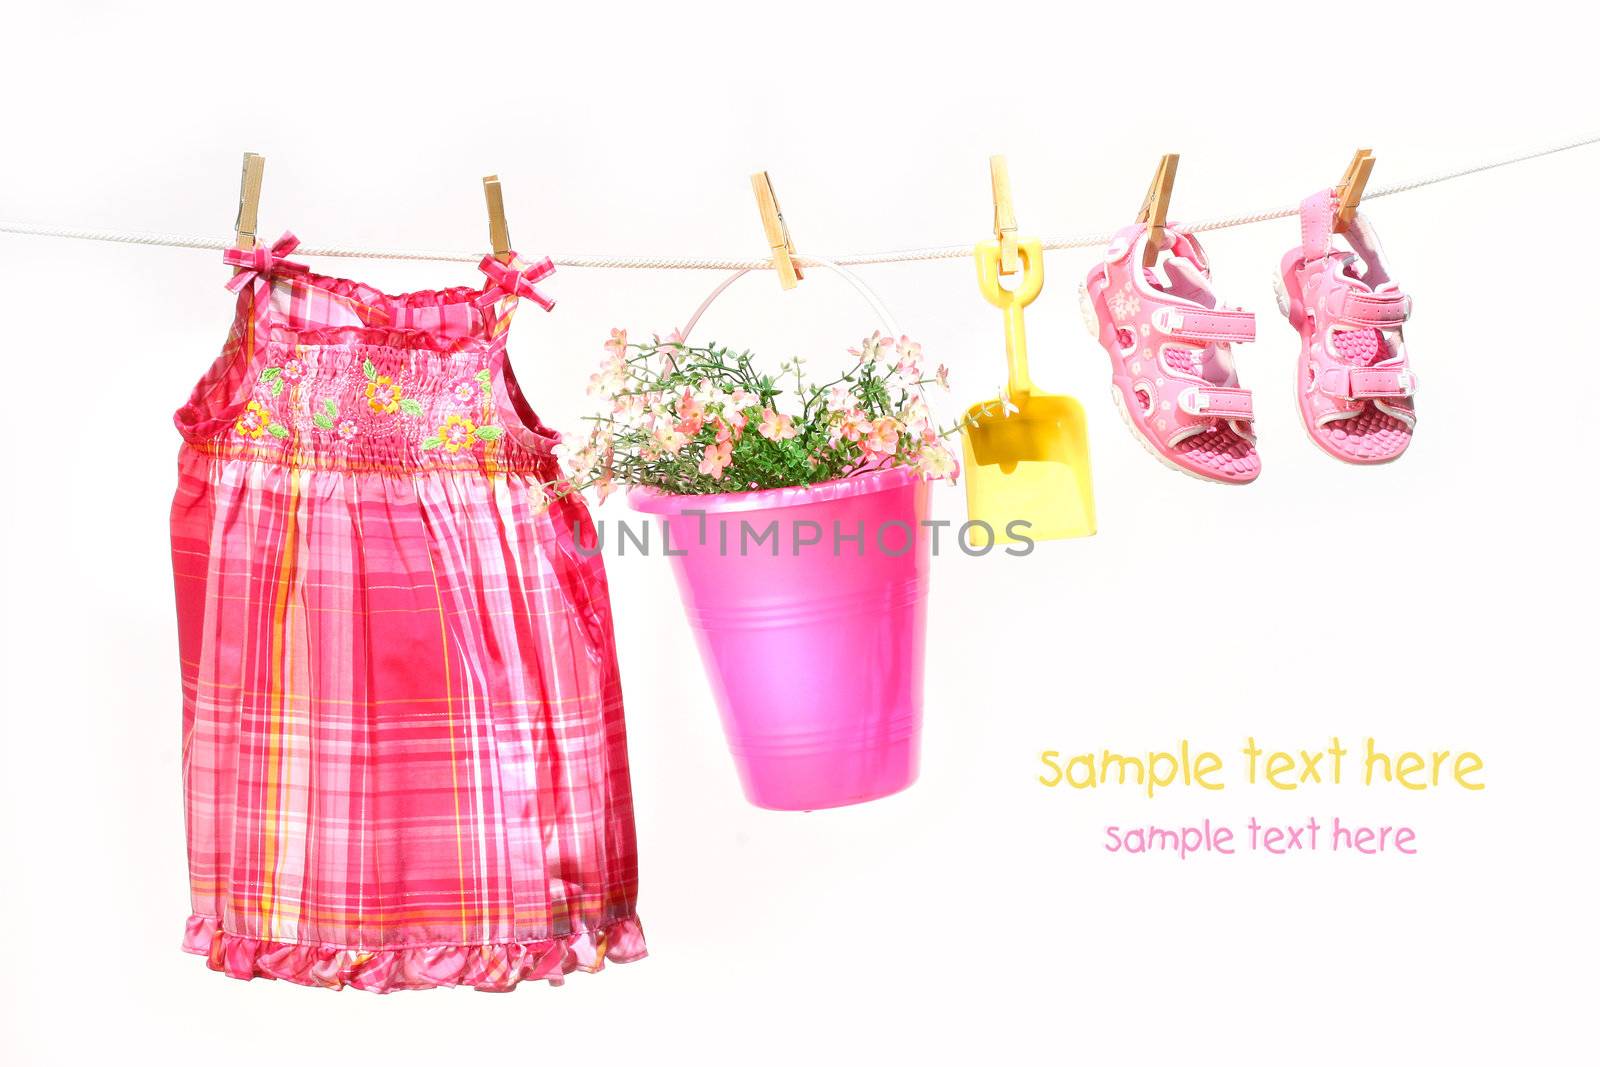 Little girl clothes and toys on a clothesline against white background